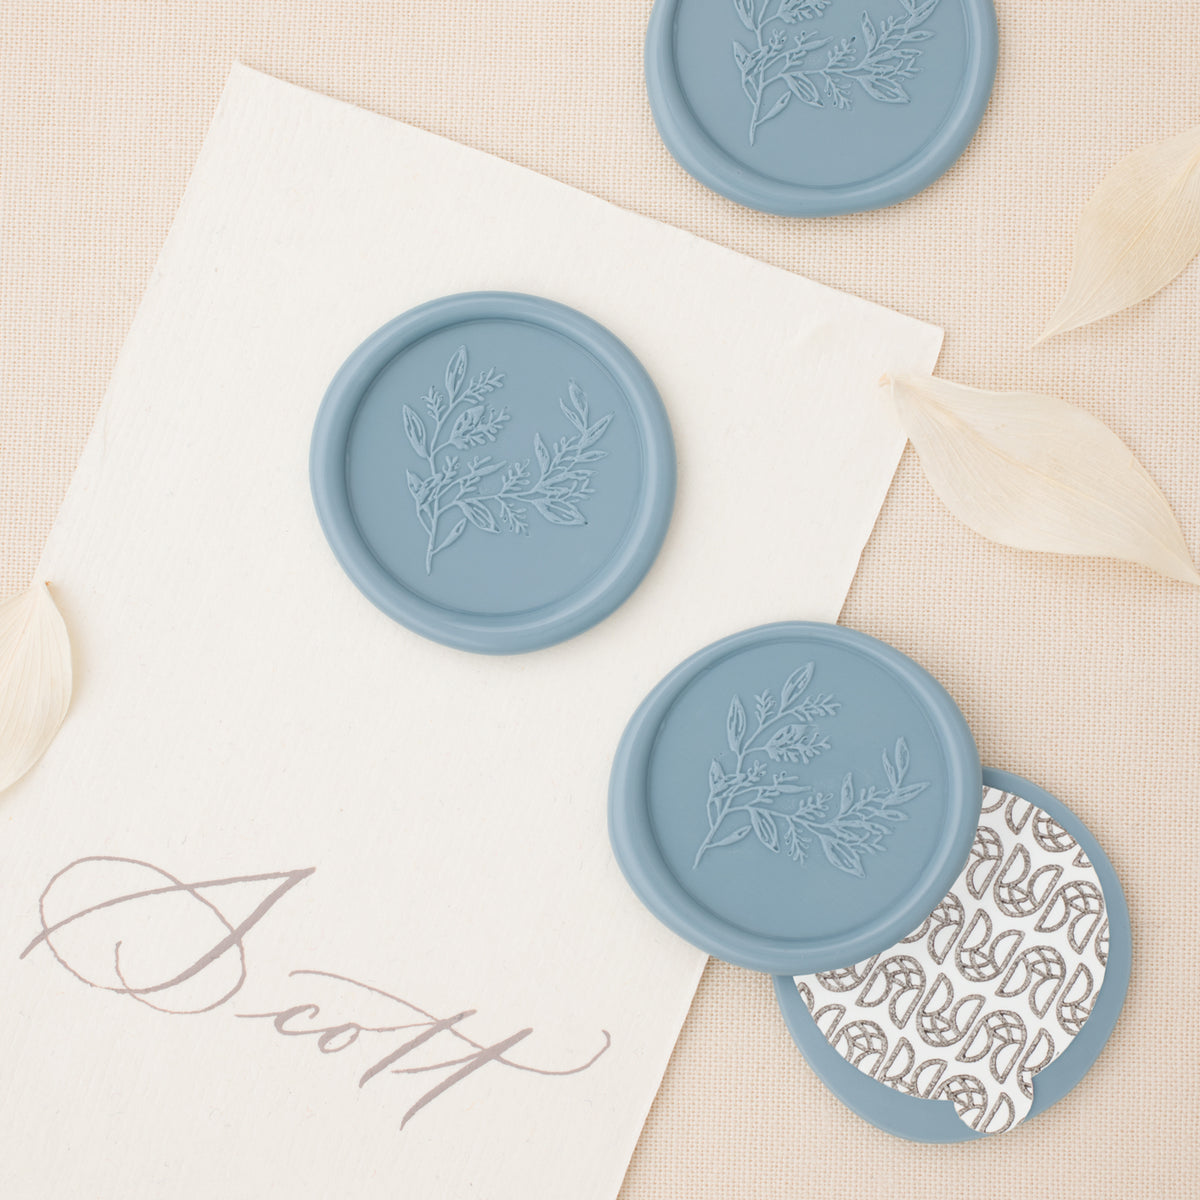 Self Adhesive Custom Monogram Wax Seal Stickers â€“ expertly hand crafted  for you from genuine sealing wax, mailable and flexible and ready to go in  the mail.